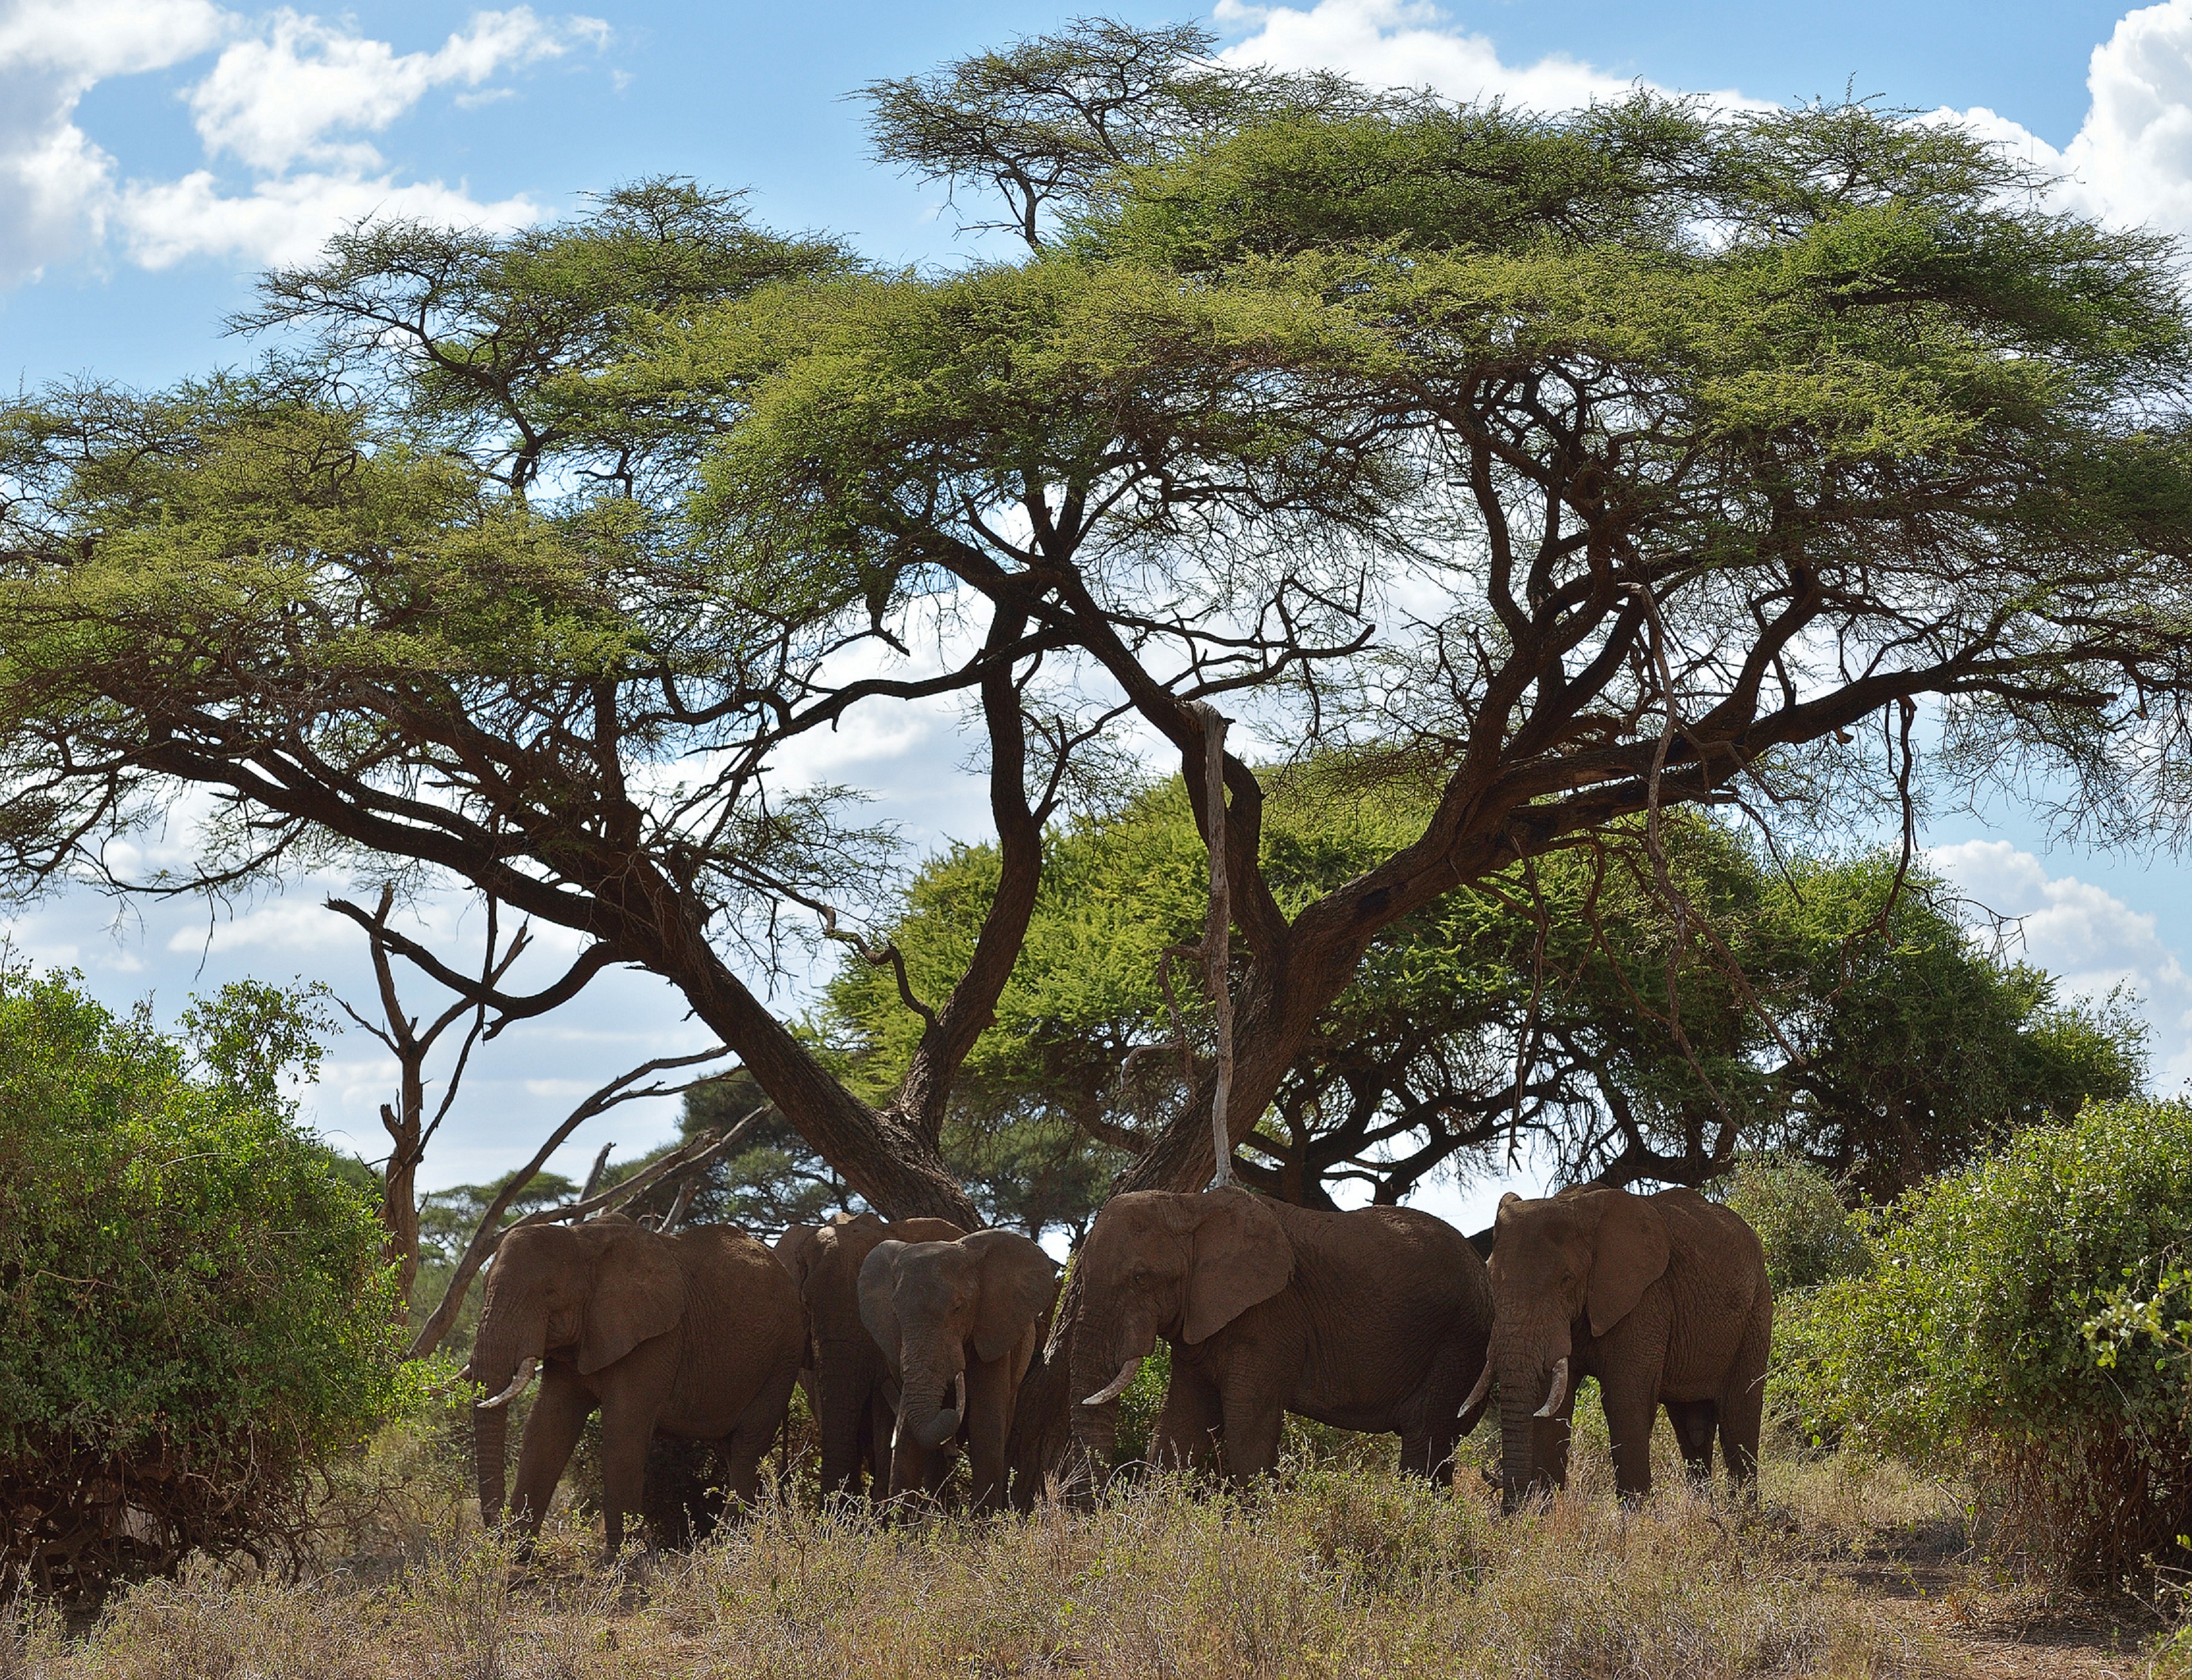 Elephants rest in the shade of a flame tree at the Amboseli national reserve November 13, 2015 at the foot of Mt. Kilimanjaro. The first delegation of the China-Africa Wildlife Ambassadors (CAWA) drawn from some of China's media corporations including JC Decaux China, iFENG.com, Beijing MTR Corporation, Shenzhen Press Group, Fulong Media and DEEP magazine arrived in Kenya as part of China's strategy to use iconic members of society to speak up against ivory trade and mobilizing society to stigmatize ivory consumption. In September this year, Chinese president Xi Jinping announced that China will take significant and timely steps to halt the domestic commercial trade of ivory thought to spur, on average, a killing of an elephant every 15 minutes for its ivory accirding to the International Fund for Animal Welfare (IFAW). AFP PHOTO/Tony KARUMBA / AFP PHOTO / TONY KARUMBA